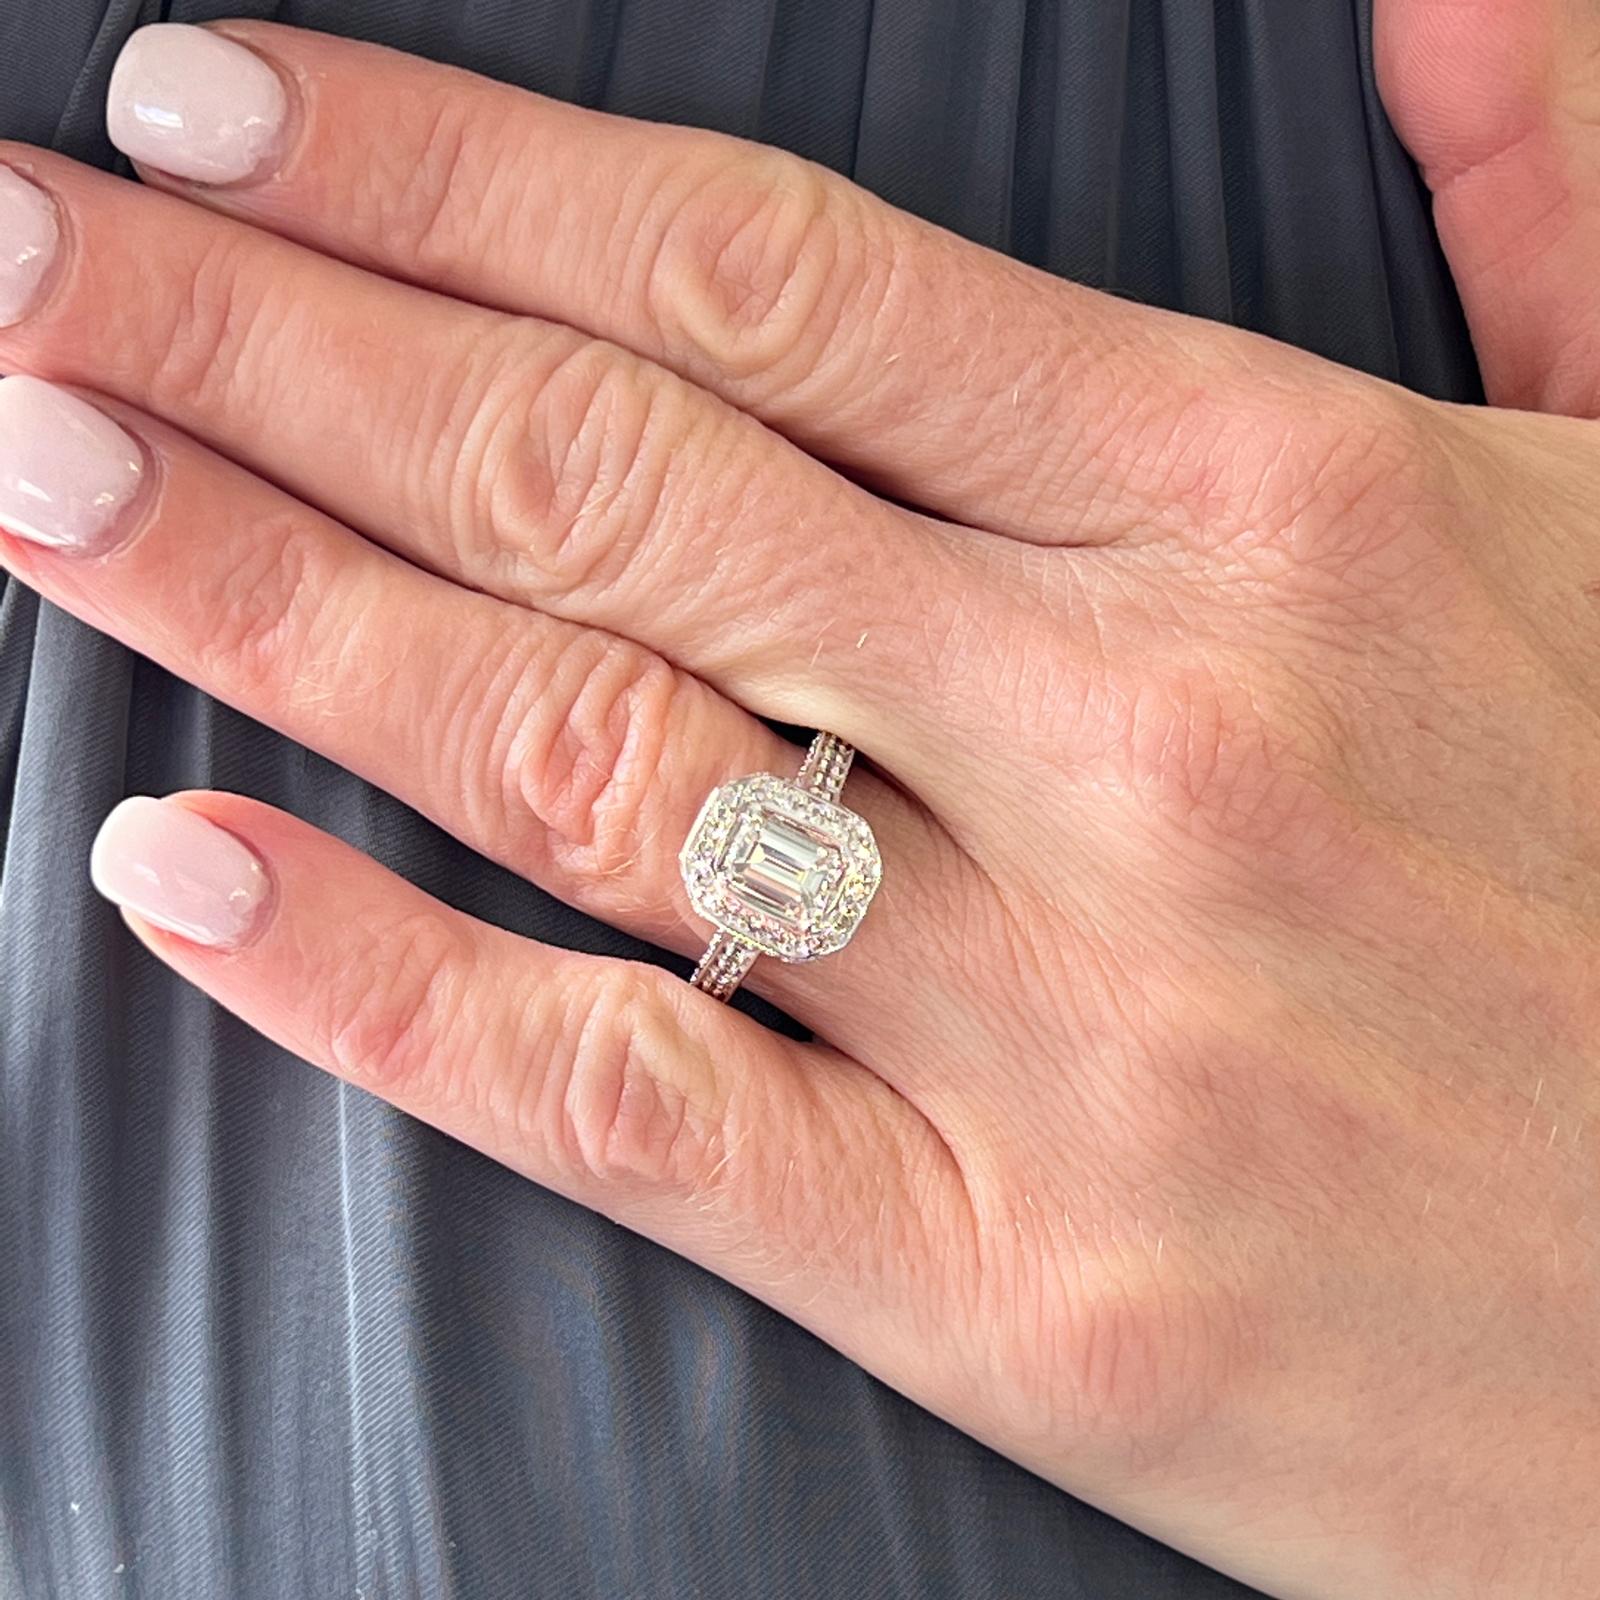 Gorgeous emerald cut diamond halo engagement ring fashioned in  14 karat white gold. The ring features an 1.10 carat emerald cut diamond graded by the GIA I color and VS1 clarity. The diamond is set in a modern halo mounting featuring approximately